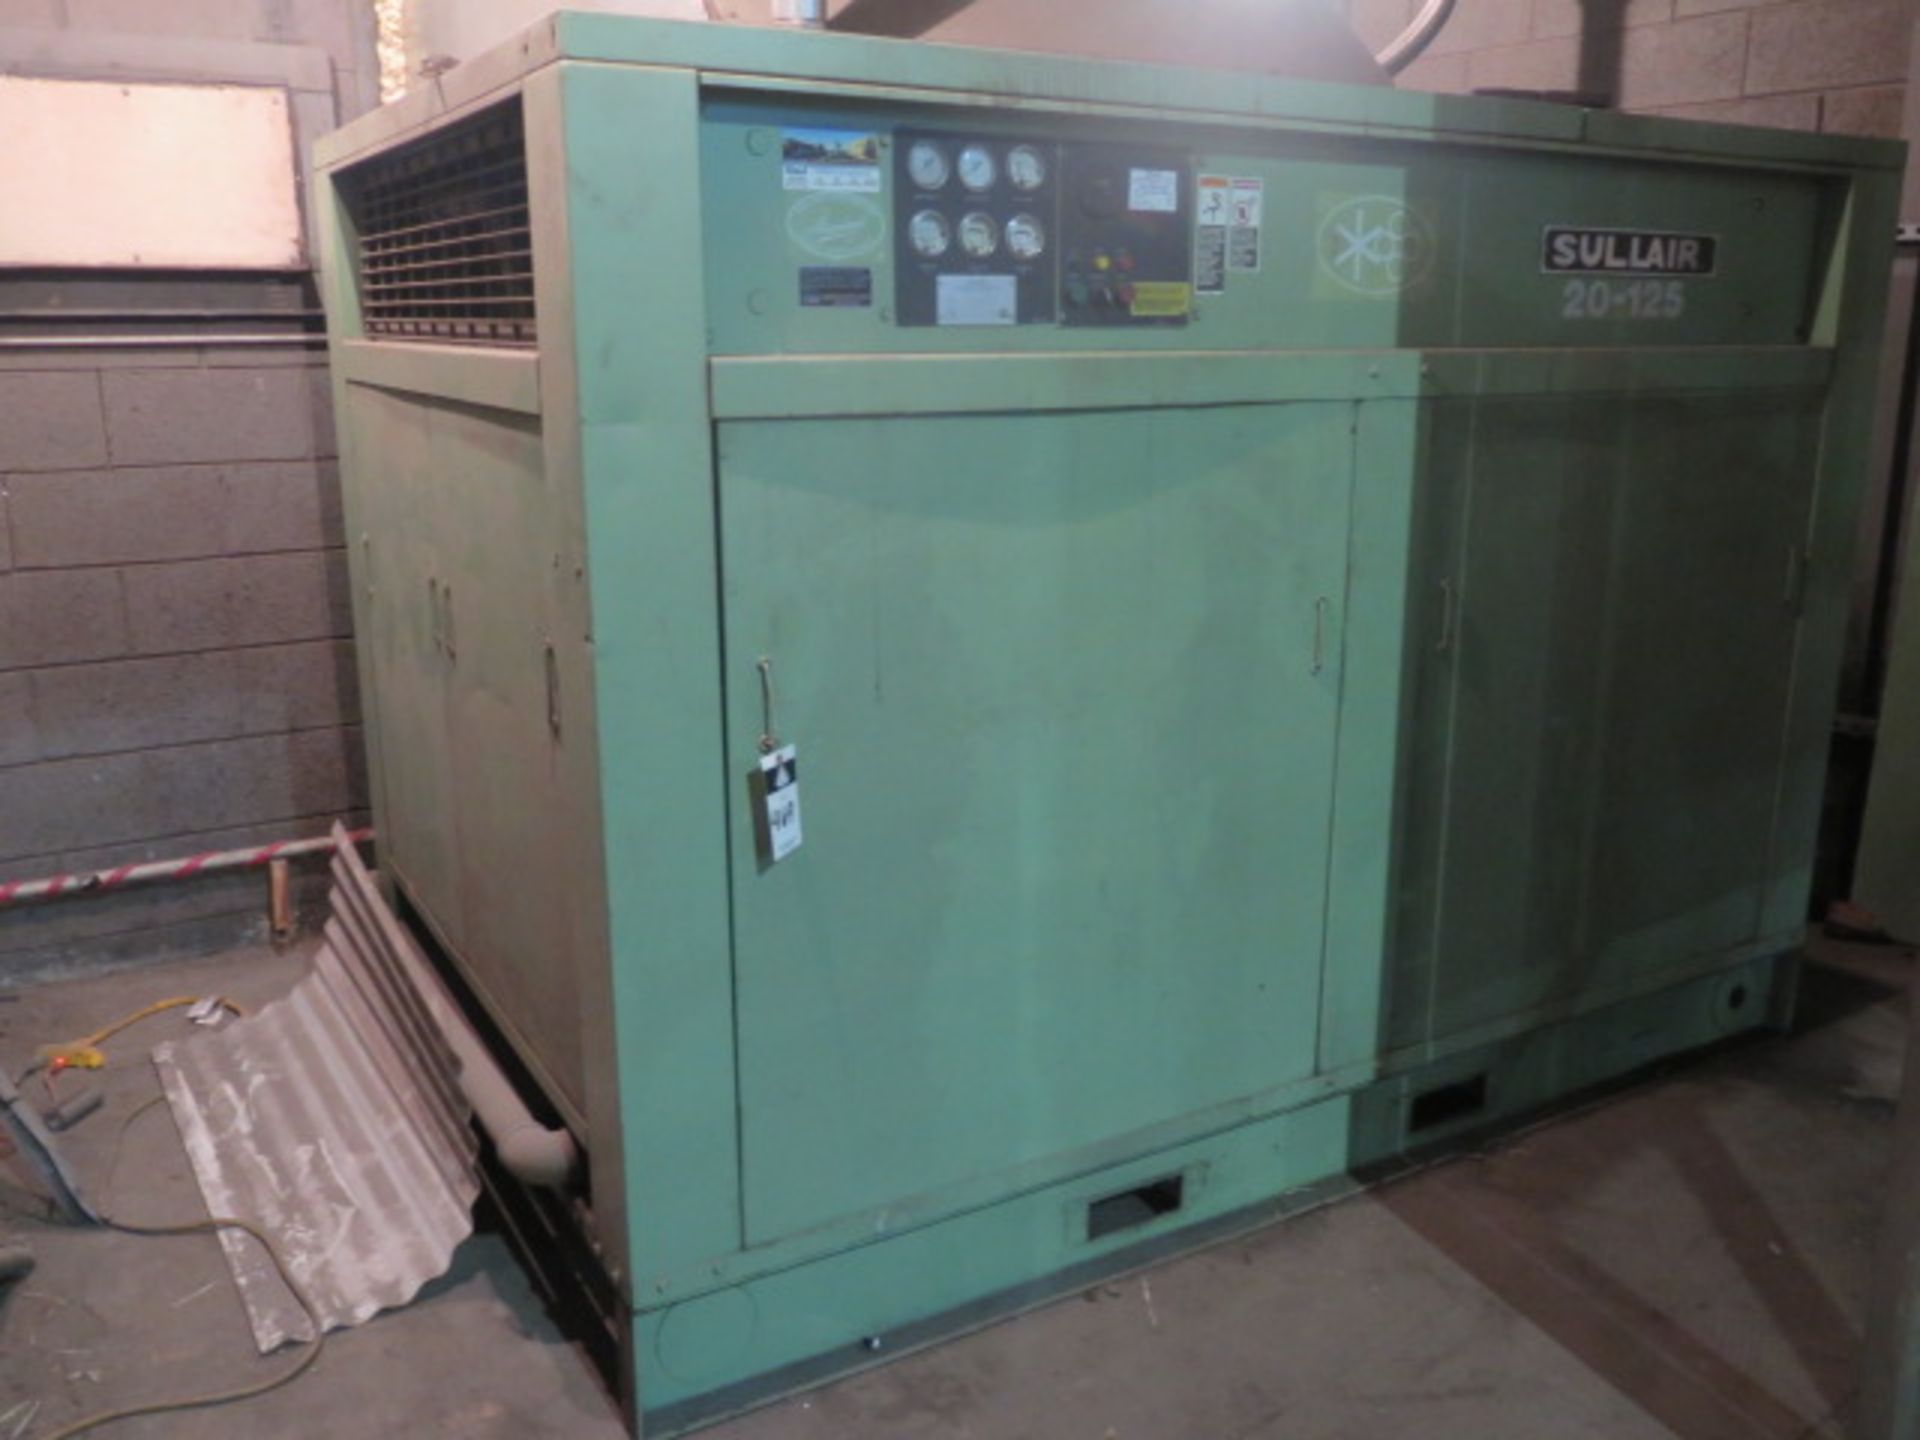 Sullair mdl. 20-125H 125Hp Rotary Screw Air Compressor s/n 003-93703 w/ 54,149 Hours - Image 2 of 6